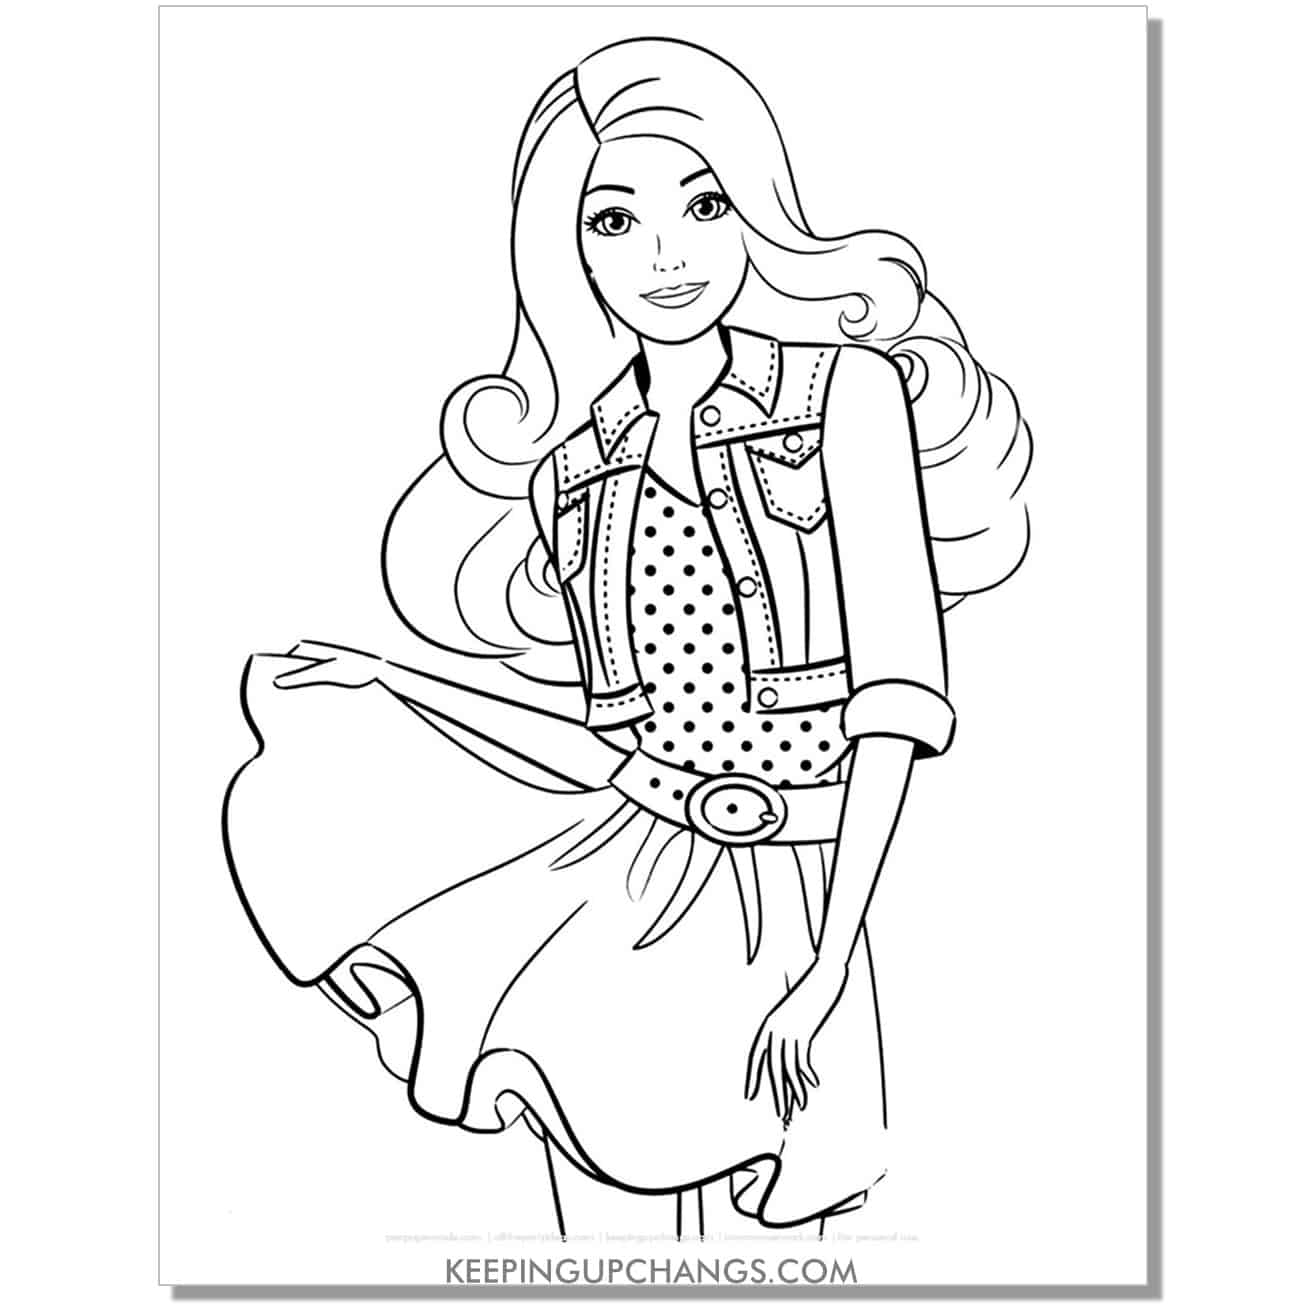 barbie in polka dot dress coloring page.